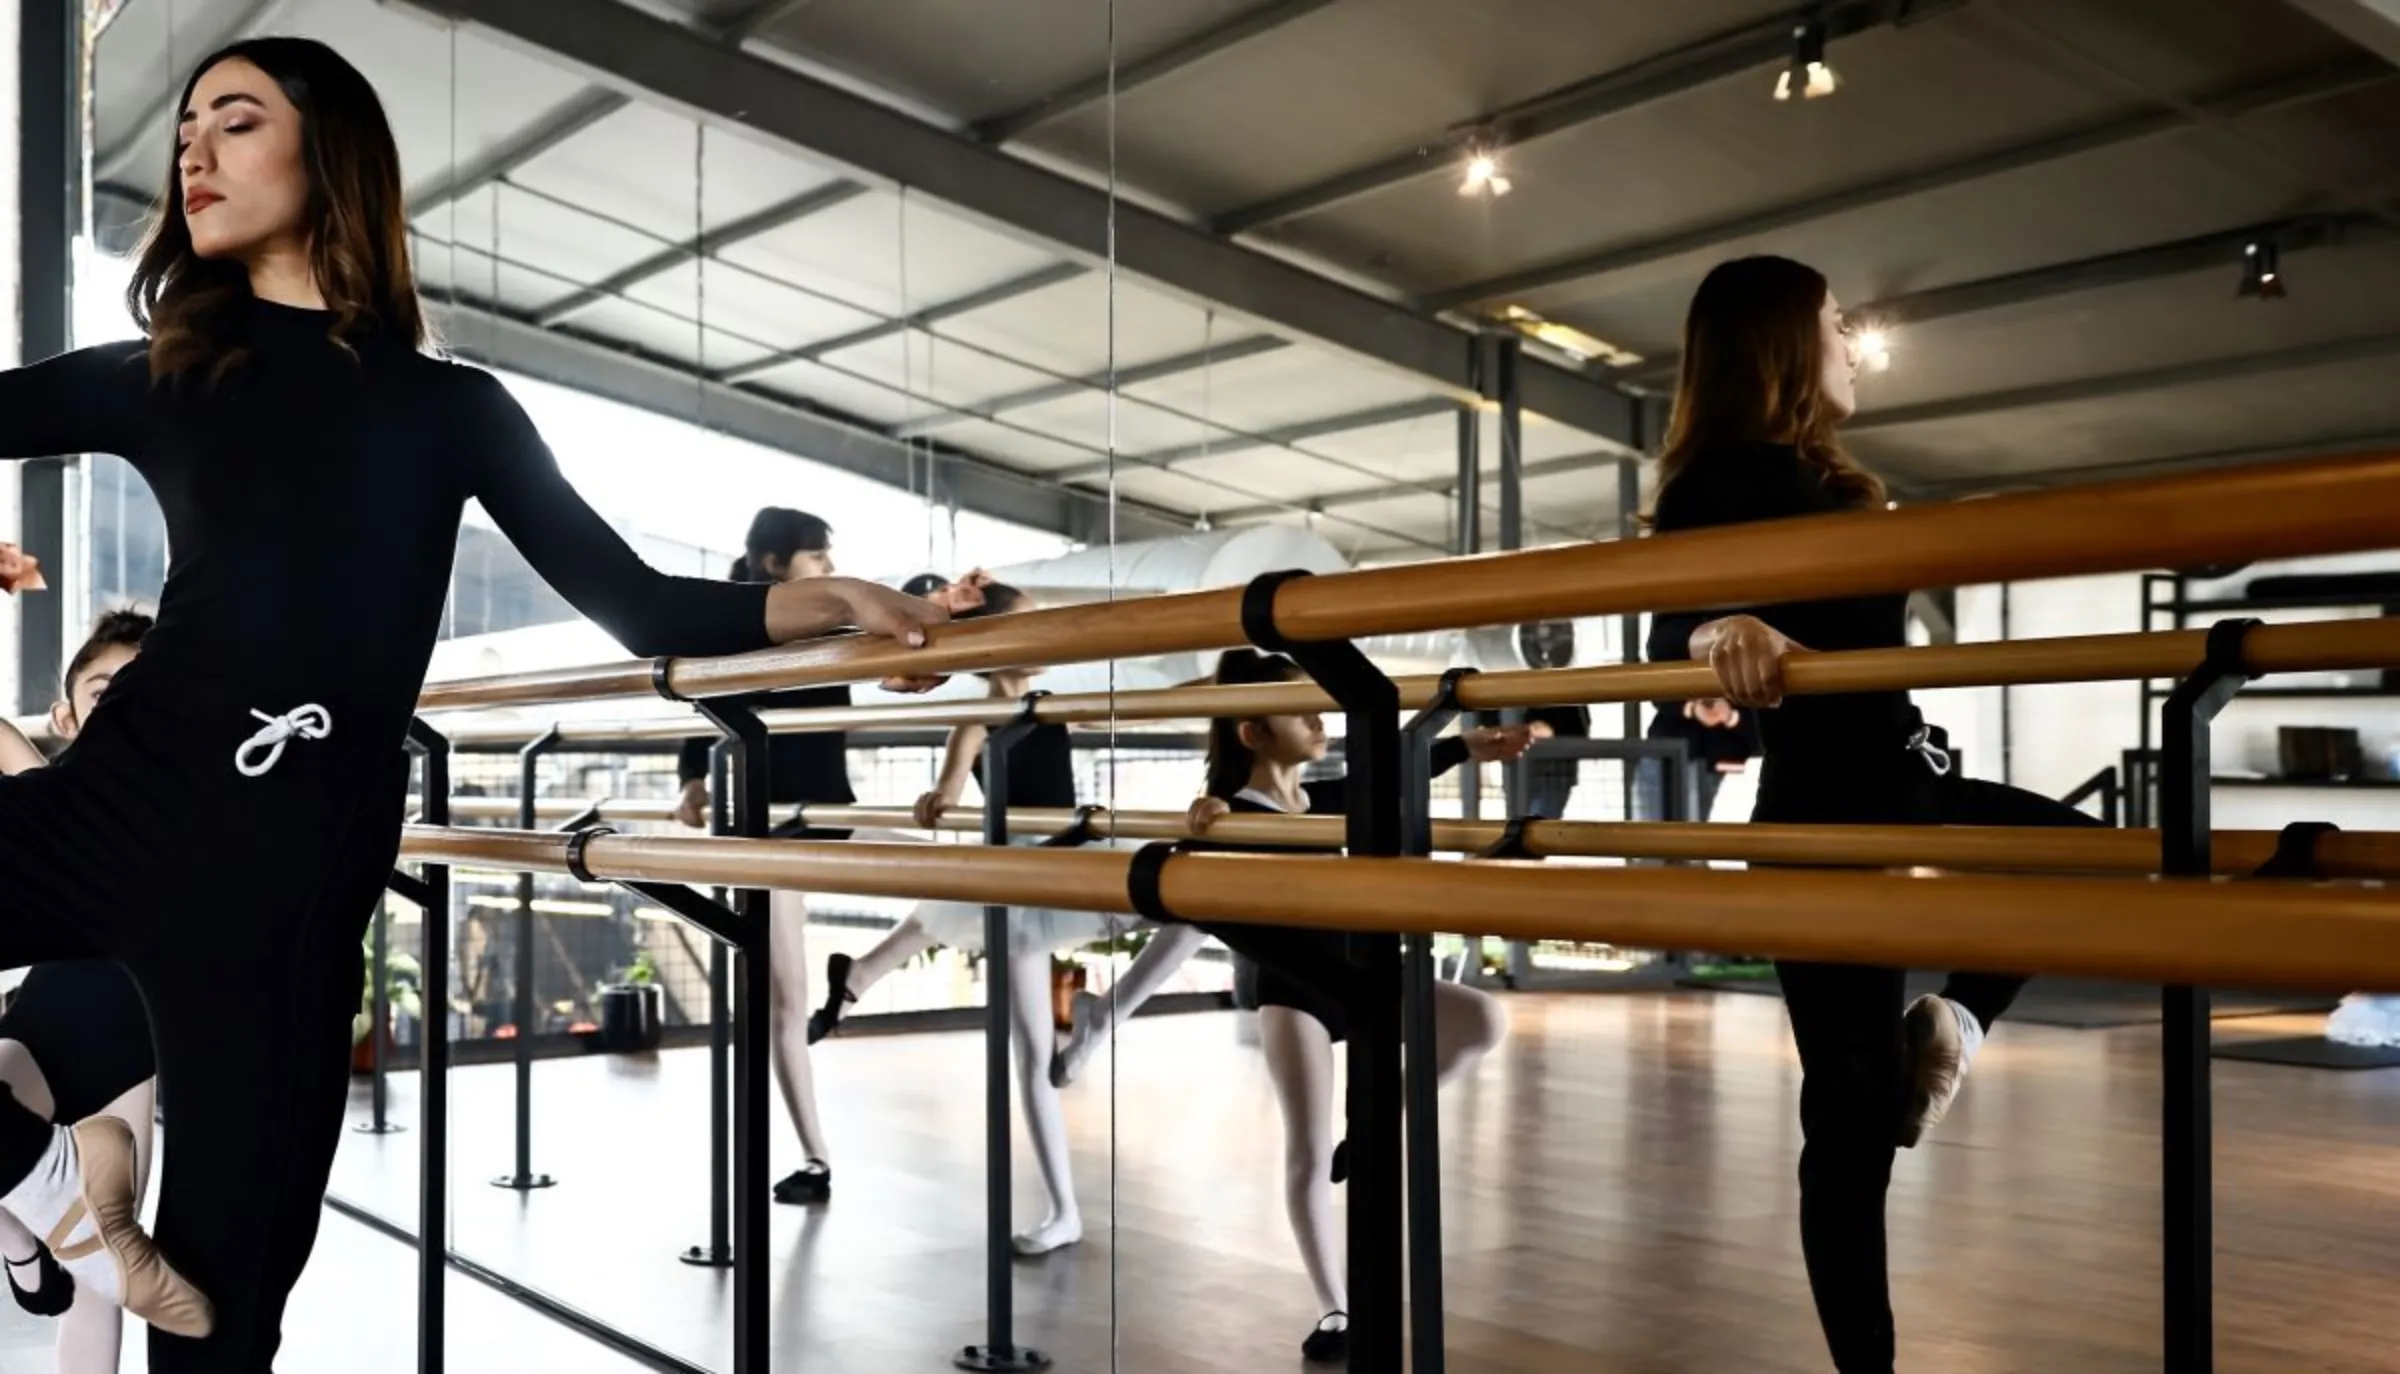 Leezan Salam, 26, leads her students while giving a ballet class. Baghdad, Iraq, February 3, 2023. Thomson Reuters Foundation/Abdullah Dhiaa al-Deen